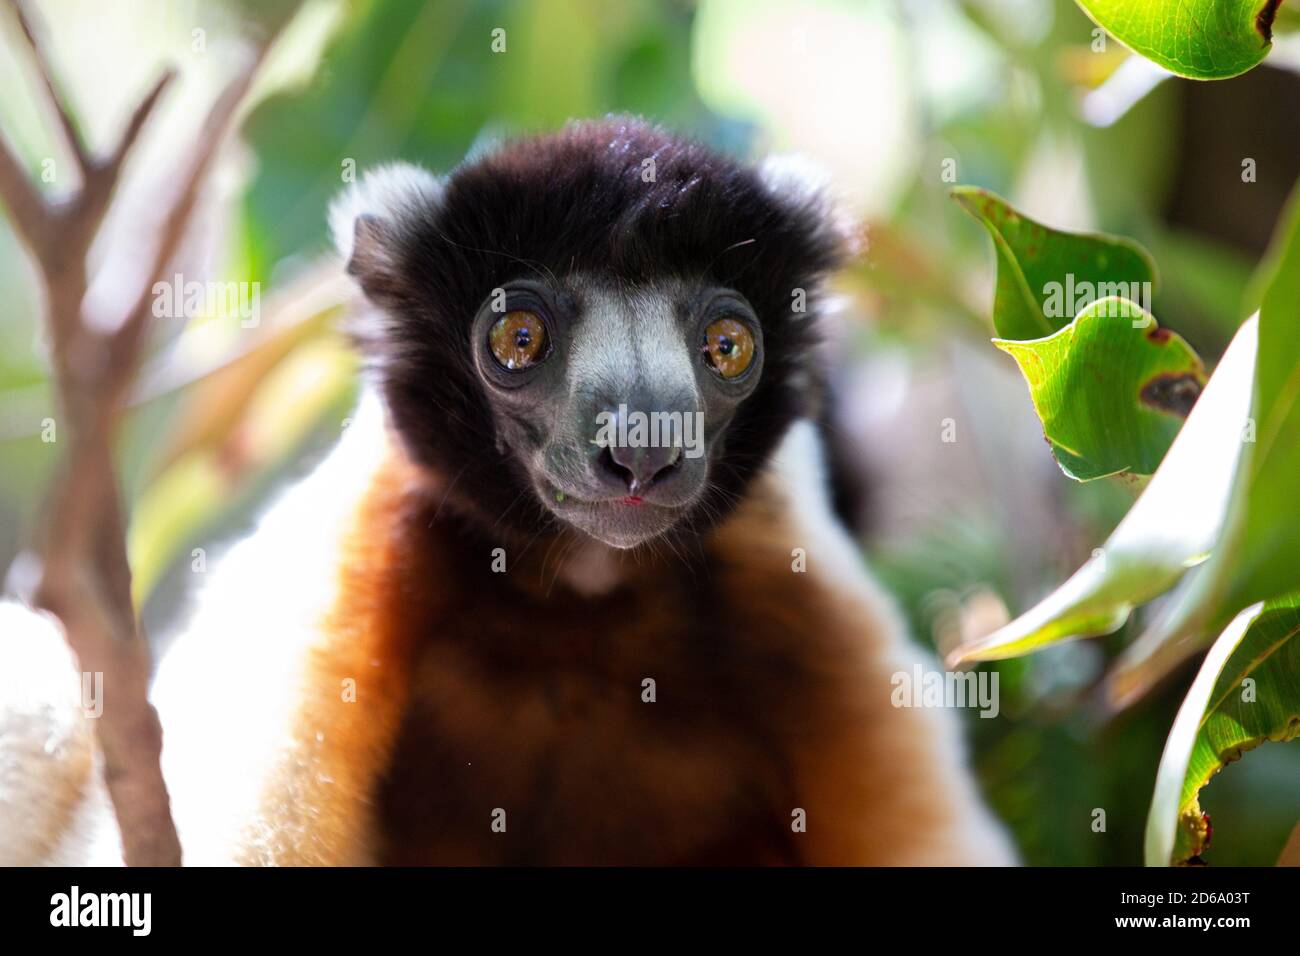 One Sifaka lemur that has made itself comfortable in the treetop. Stock Photo